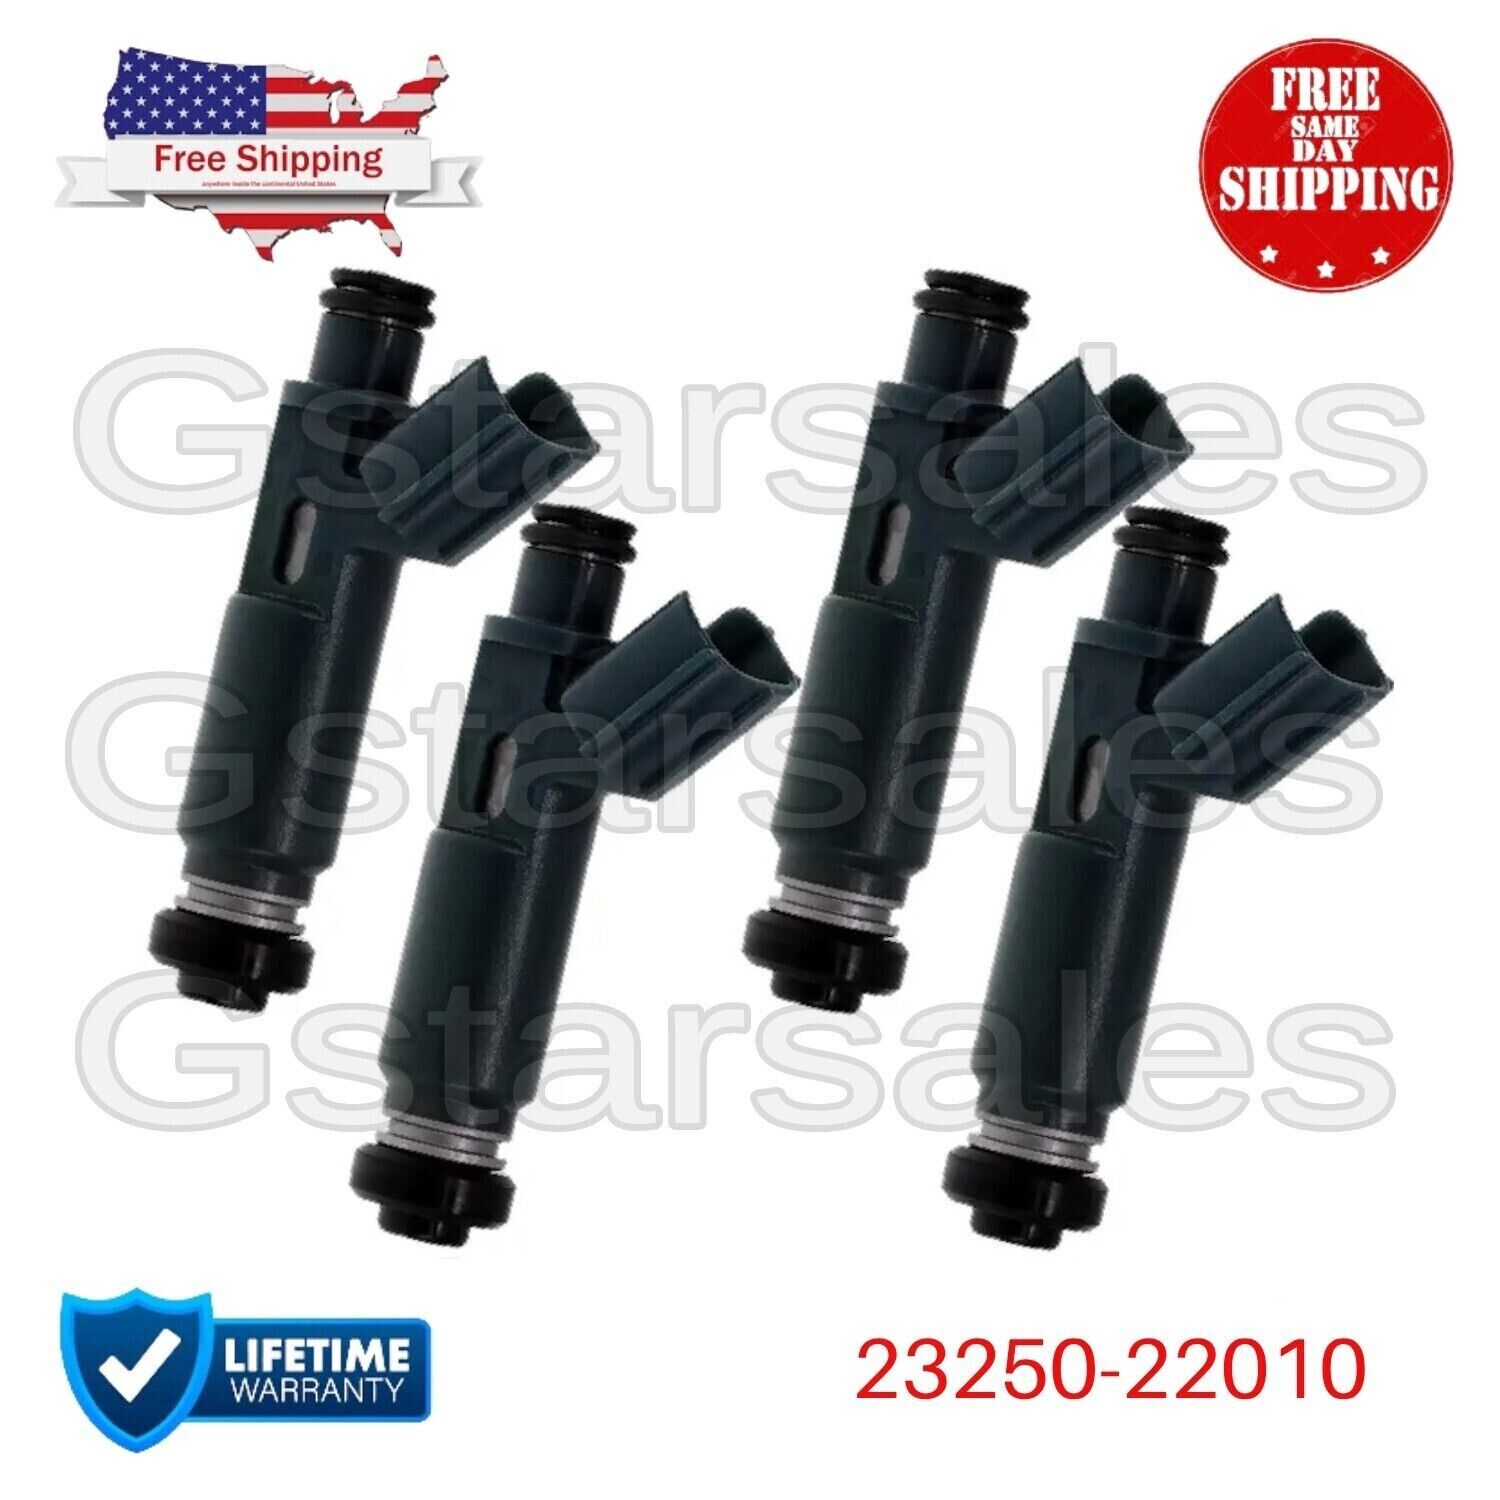 OEM Denso FUEL INJECTOR FOR 1998-1999 Toyota Corolla Chevrolet Prizm 1.8L I4 4PC